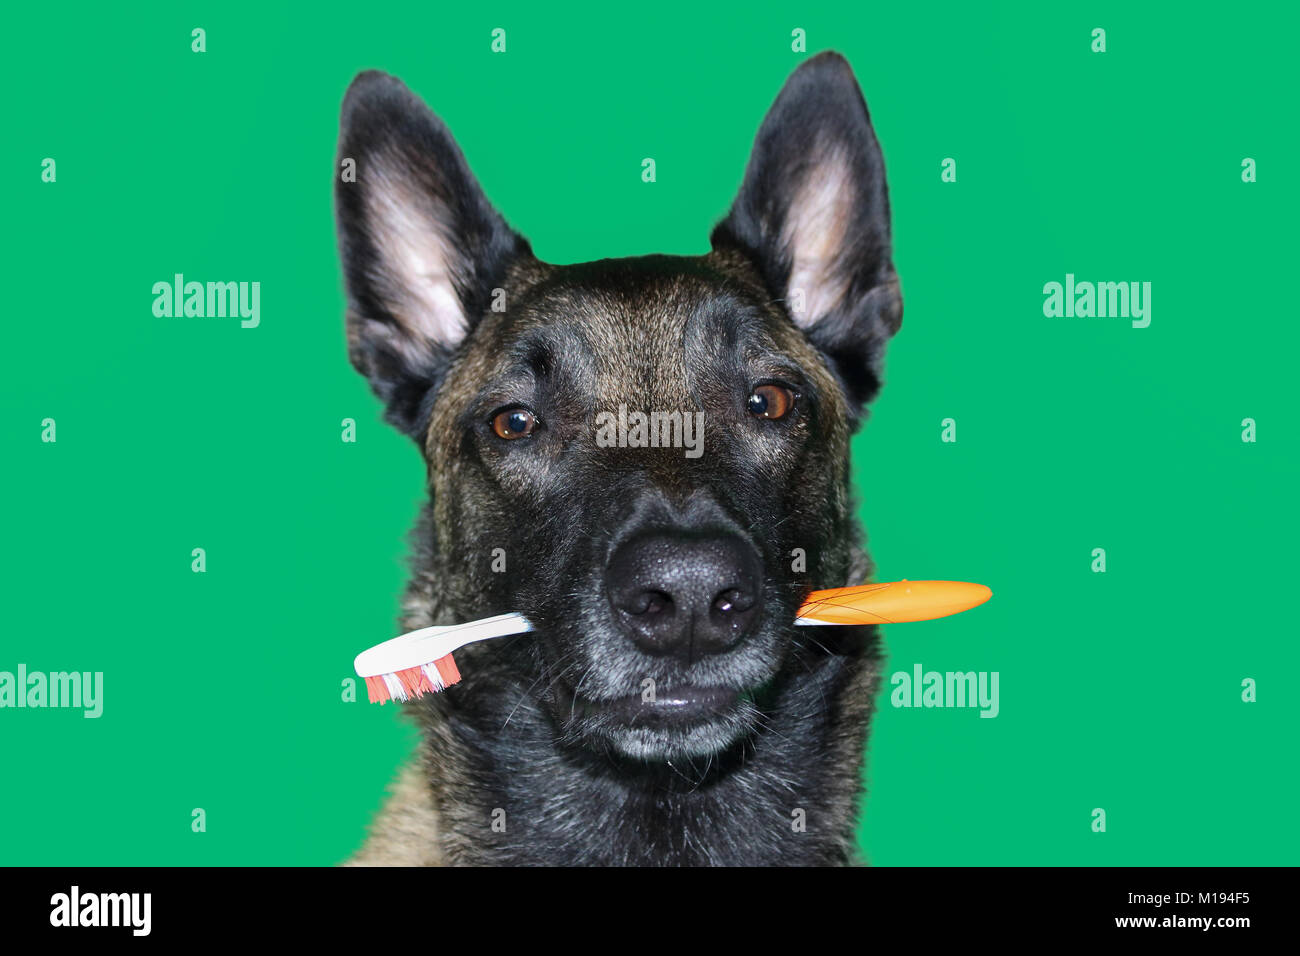 a portrait of Belgian Malinois shepherd dog with a toothbrush between teeth for hygiene and dental care of the dog on green background Stock Photo